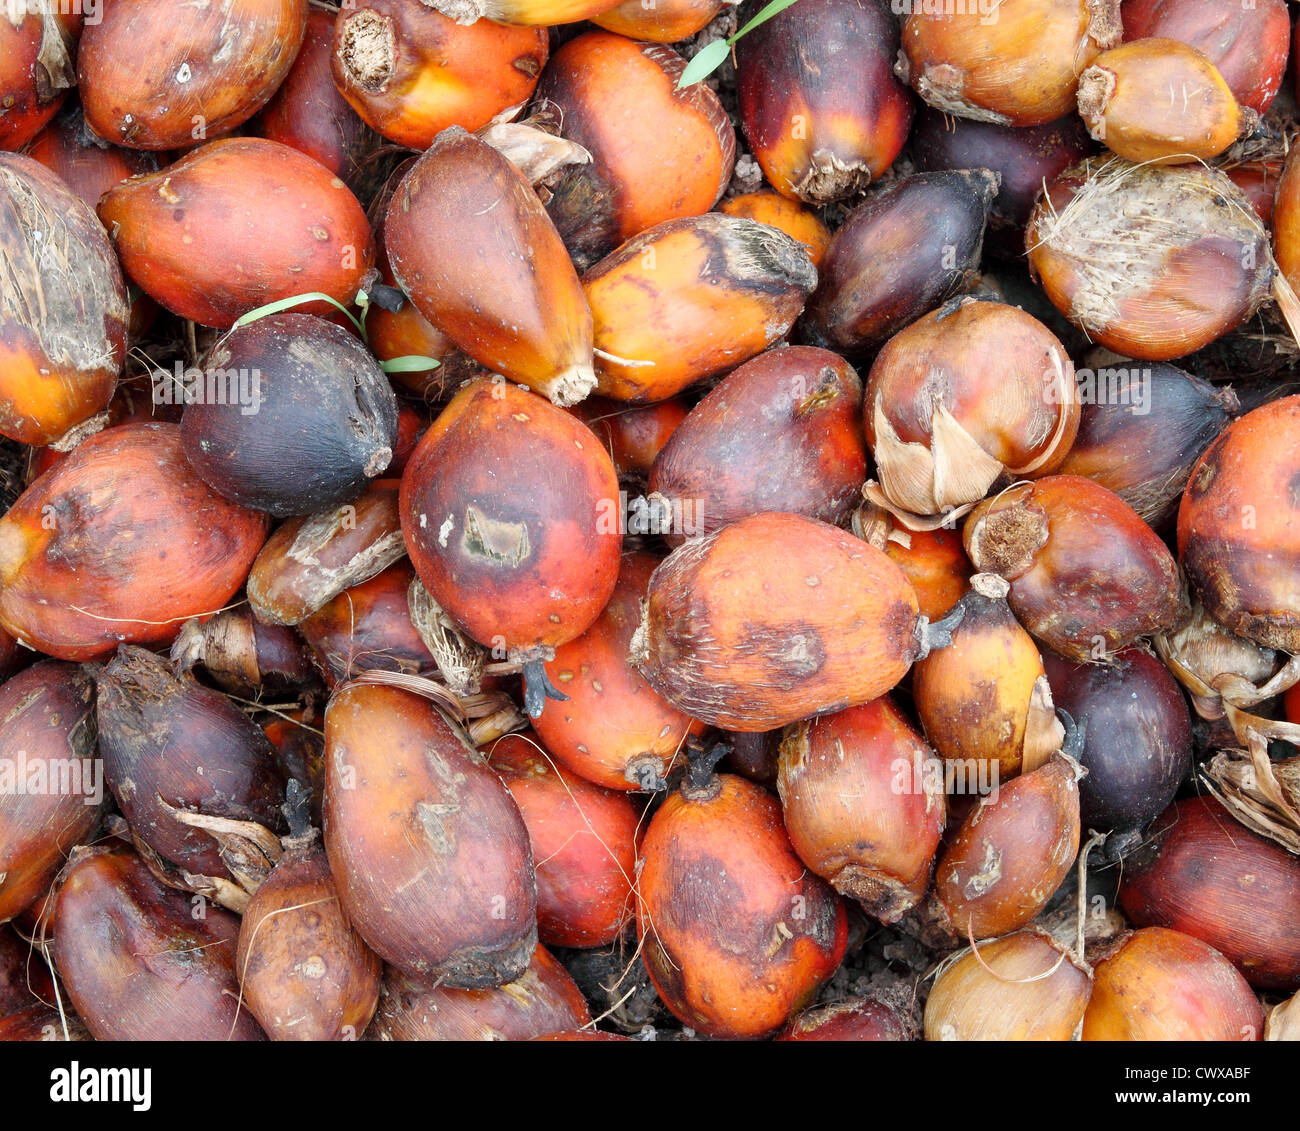 Palm kernels from a palm tree Stock Photo